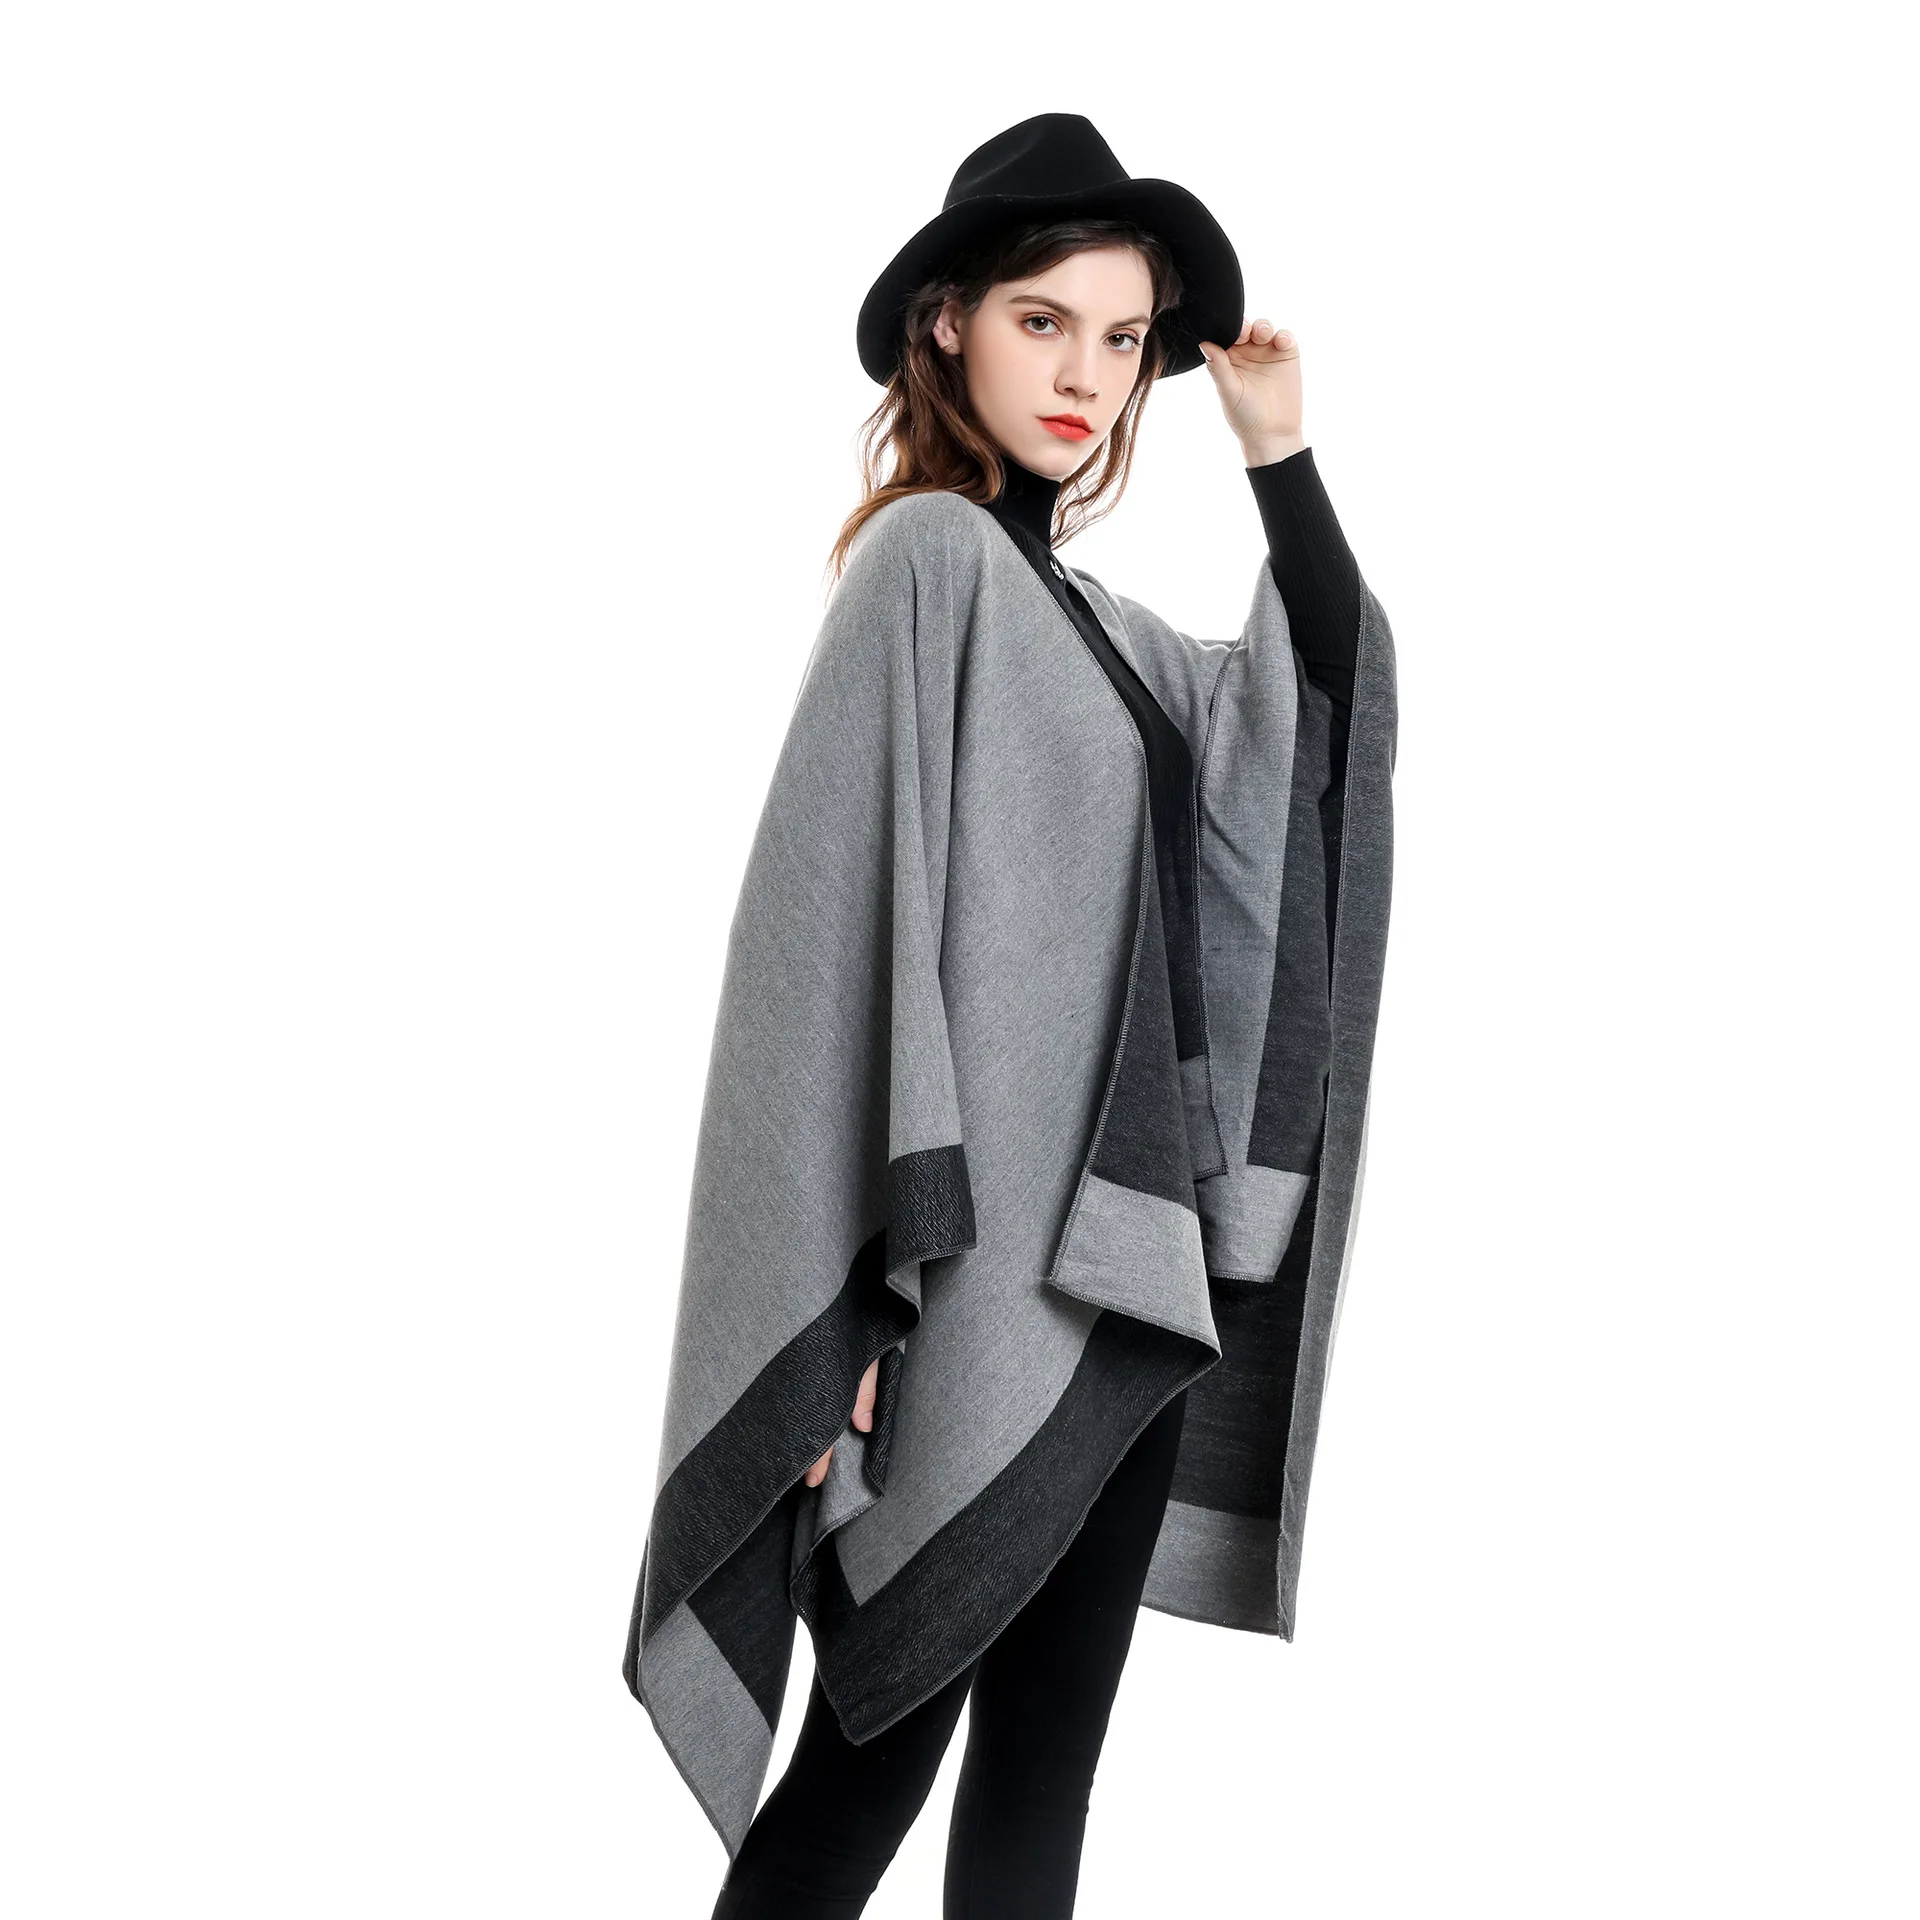 2022 Spring  Autumn Solid Color European  American Travel Shopping New Women's Warm Big Shawl Sunscreen Gray Cloak Scarf new floral totem amazon hot selling cotton and hemp material comfortable all match scarf travel sunscreen shawl